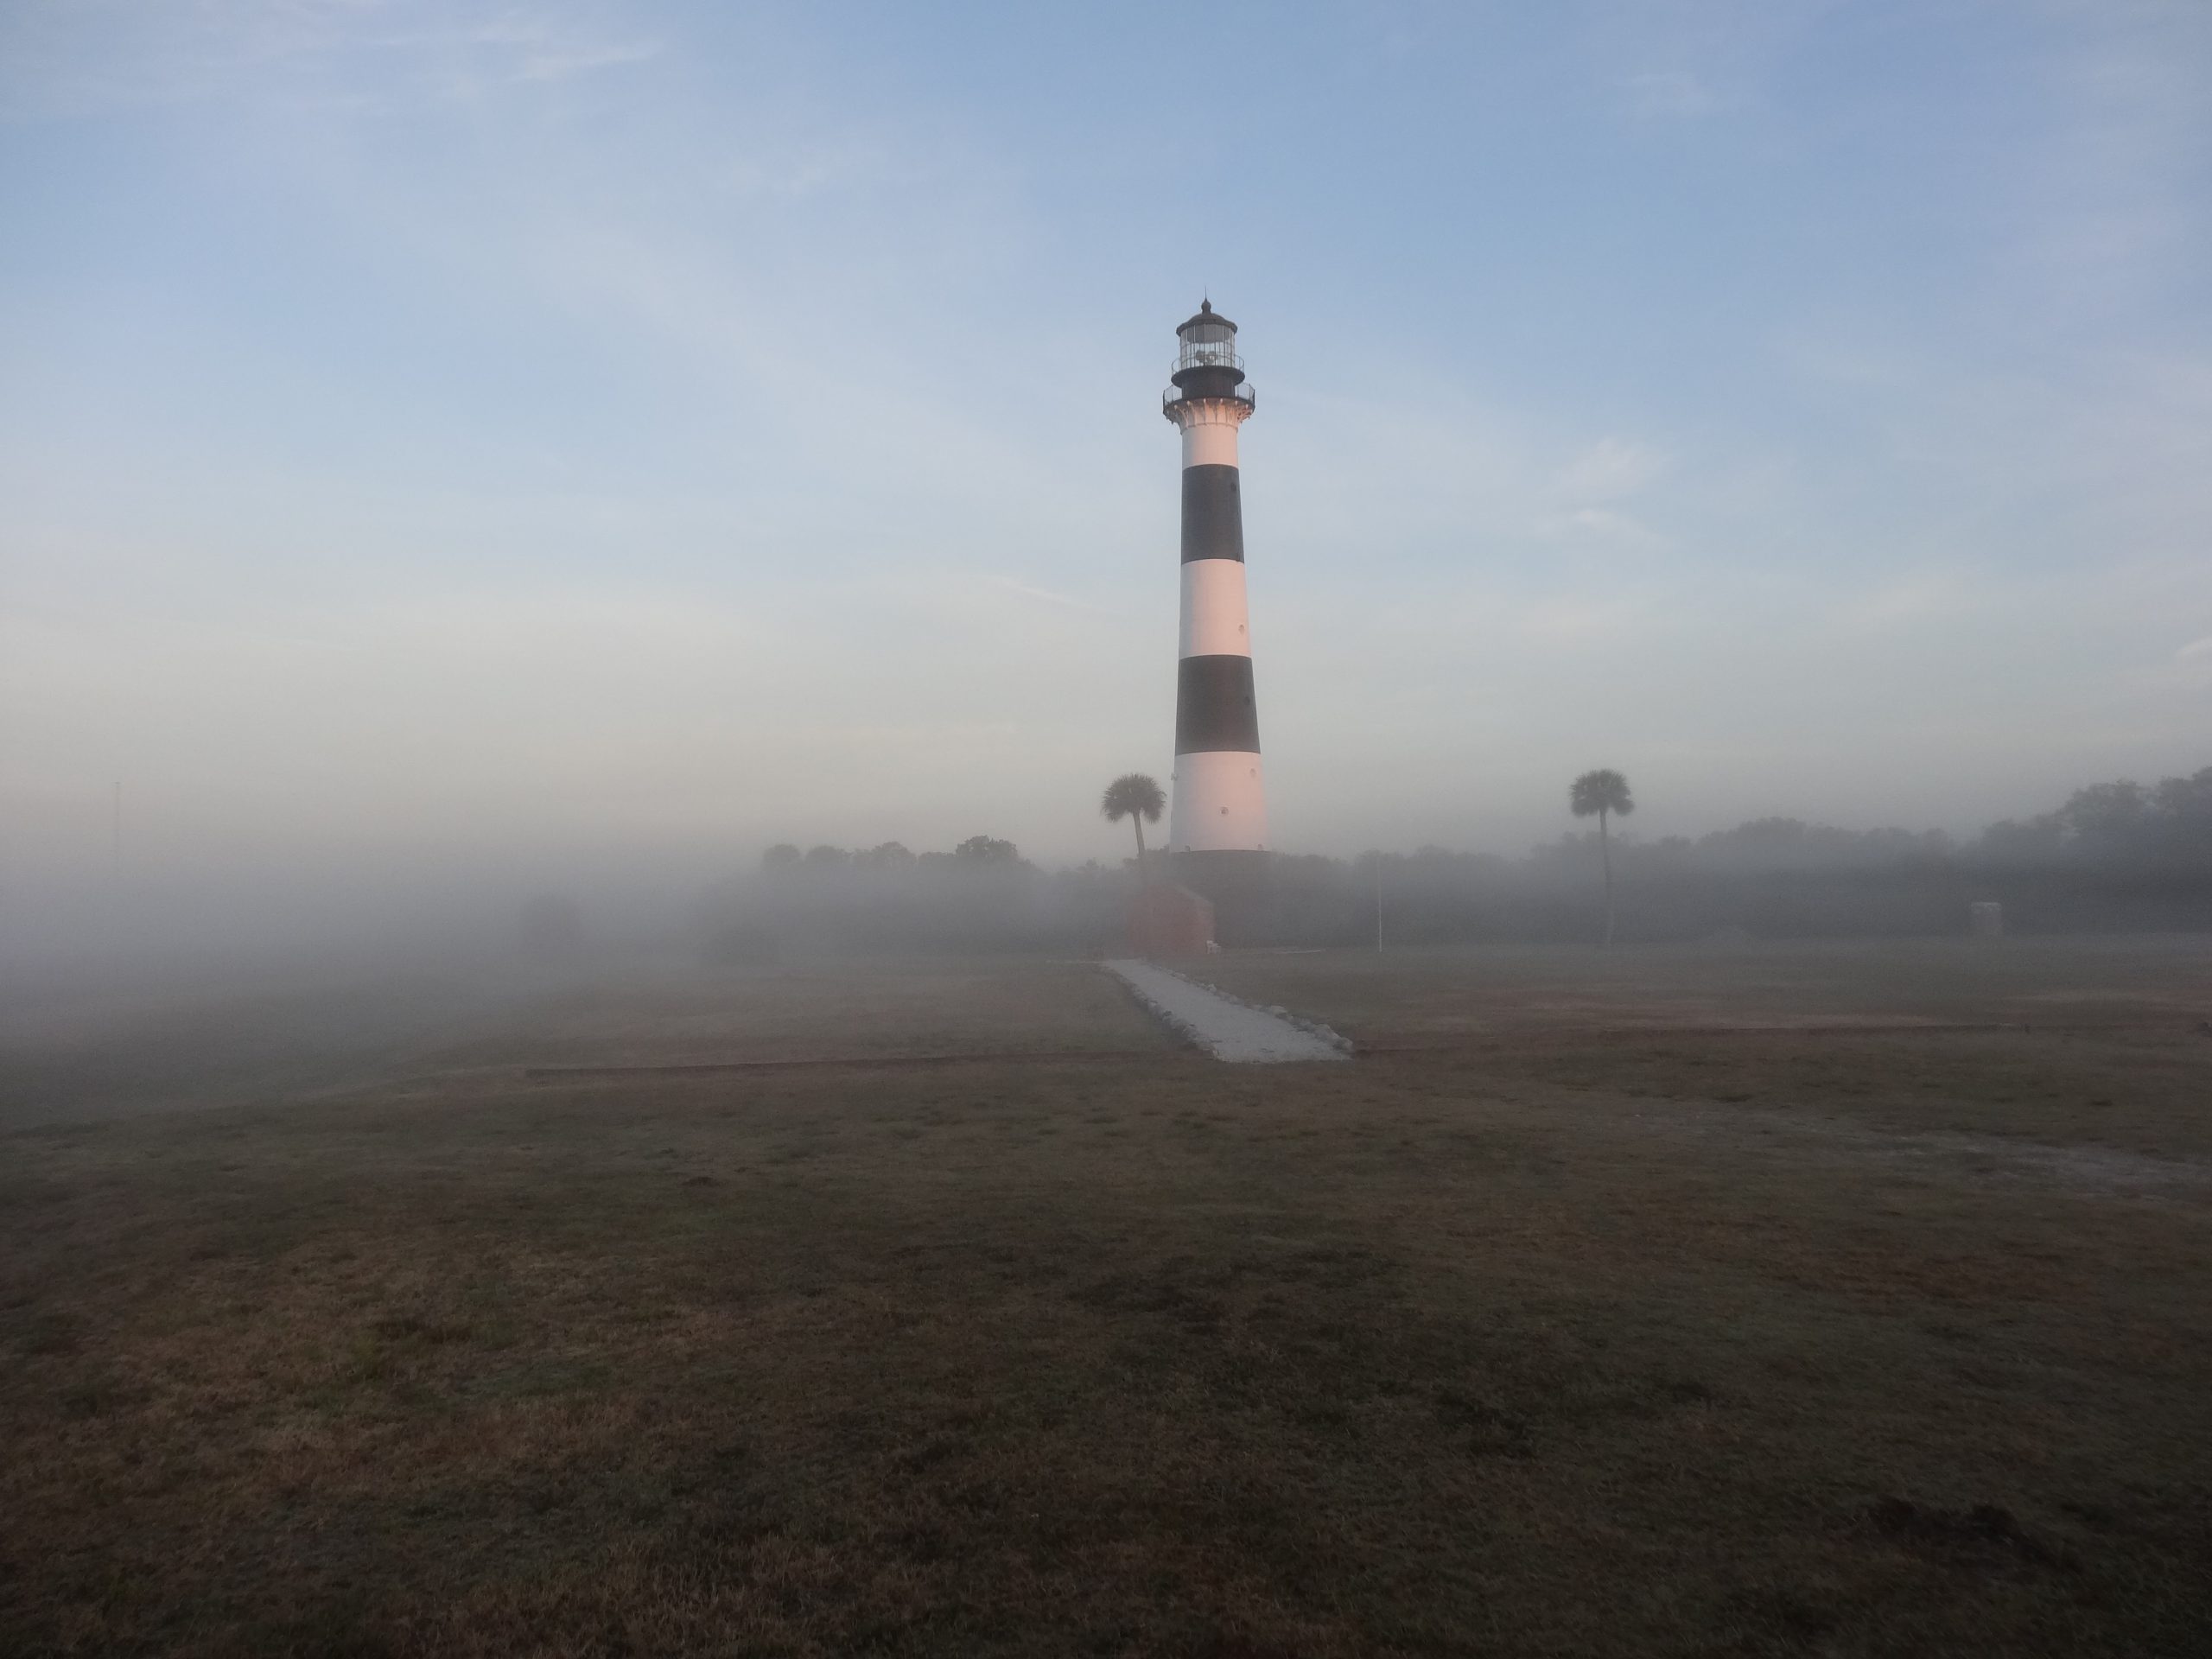 A Cool and Beautiful Fog Surrounds the Cape Canaveral Lighthouse